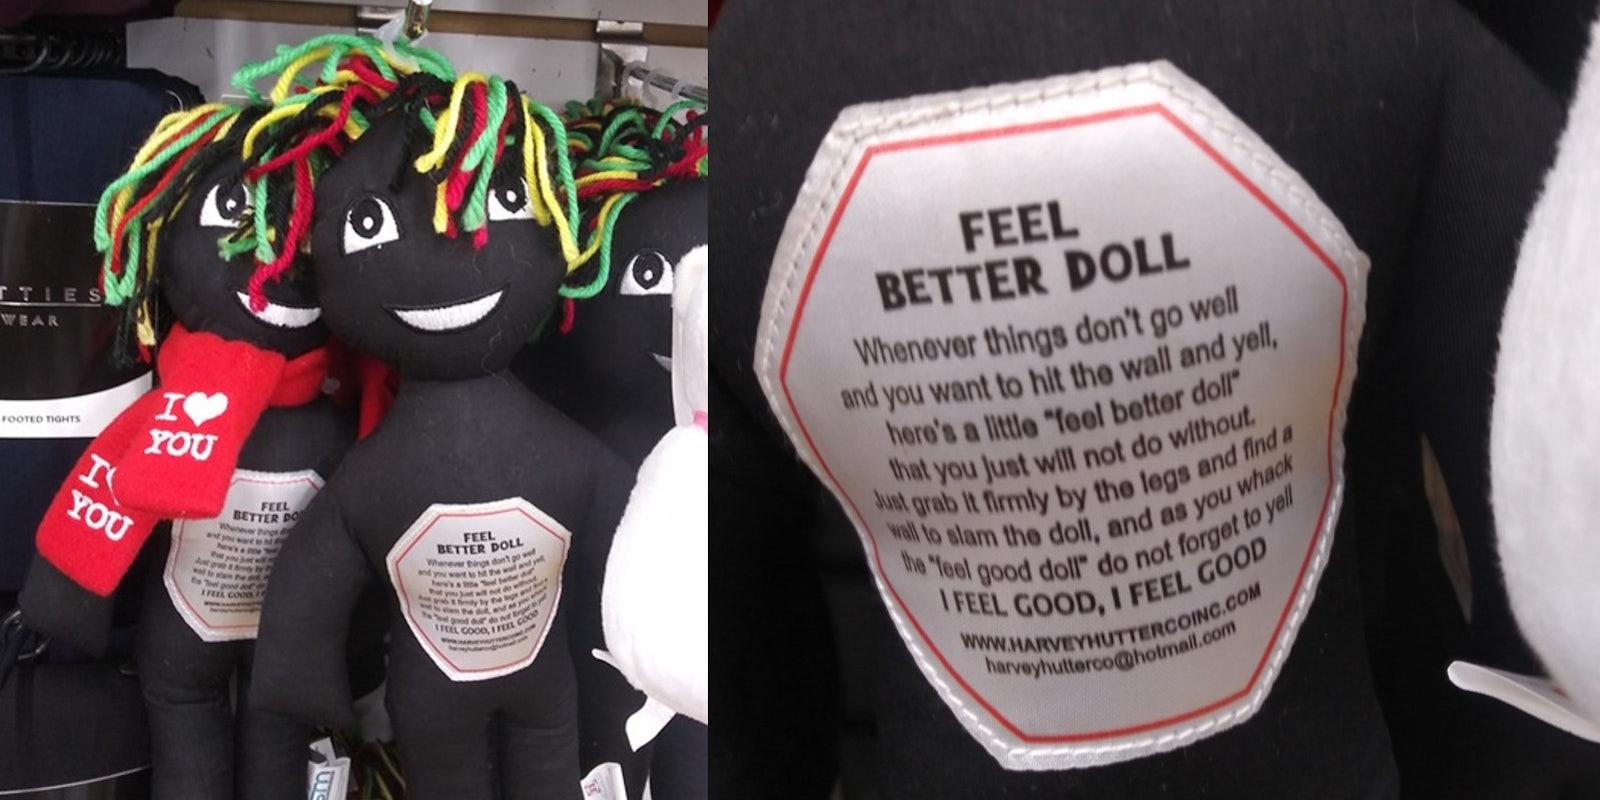 Left: Dolls in black fabric, with hair strings in yellow, red, black, green and white. The dolls wear a smile on their face, and have a red scarf around their neck that reads 'I ❤ you.' Right: Description on the doll instructs user to 'whack' the doll against a wall to 'feel better'